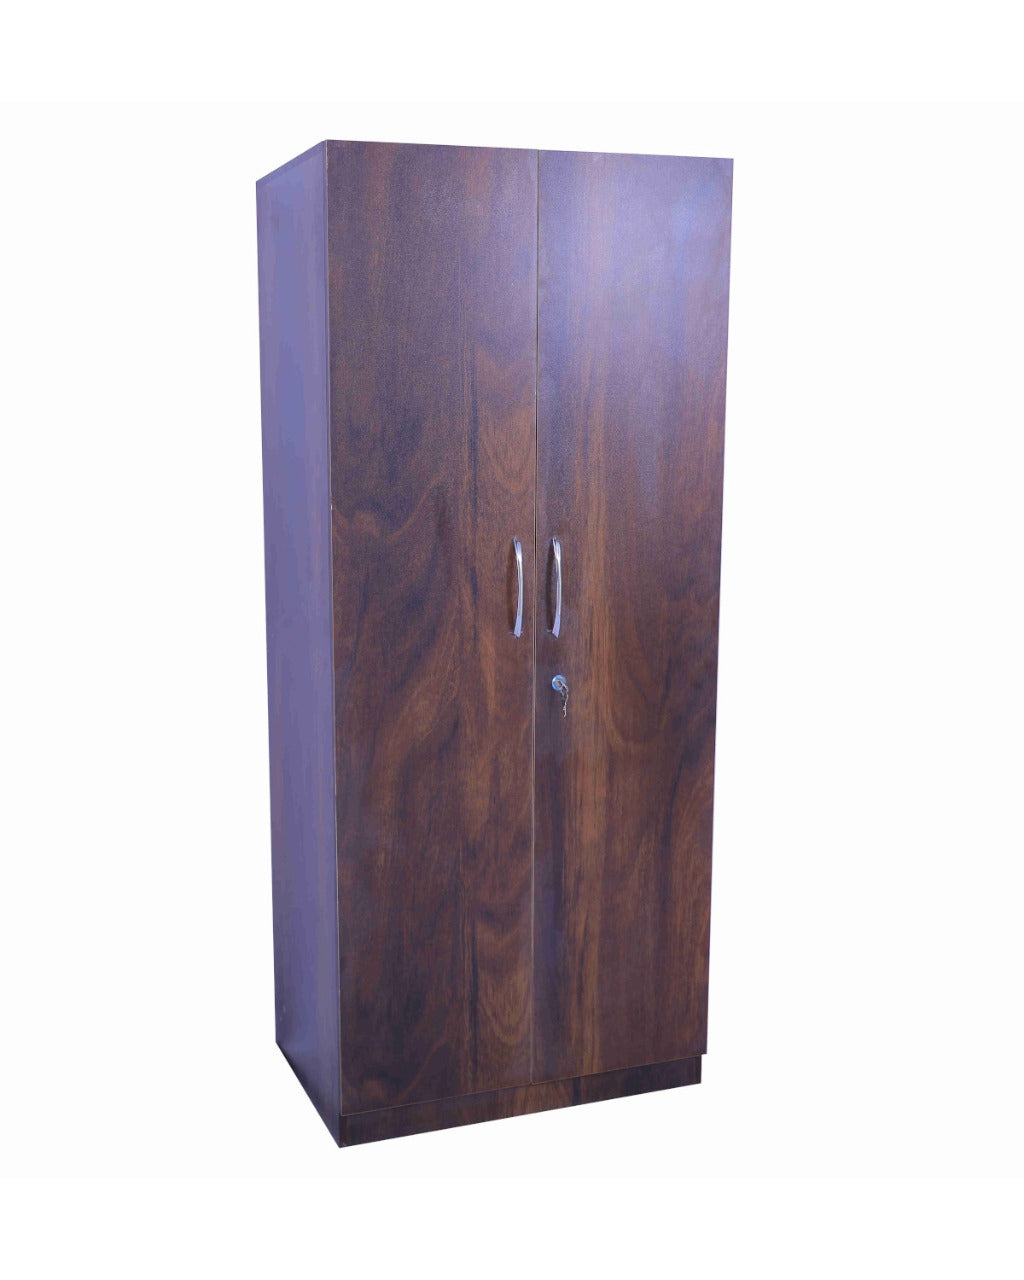 Quinen Two Door Wardrobe - Large - Without Mirror